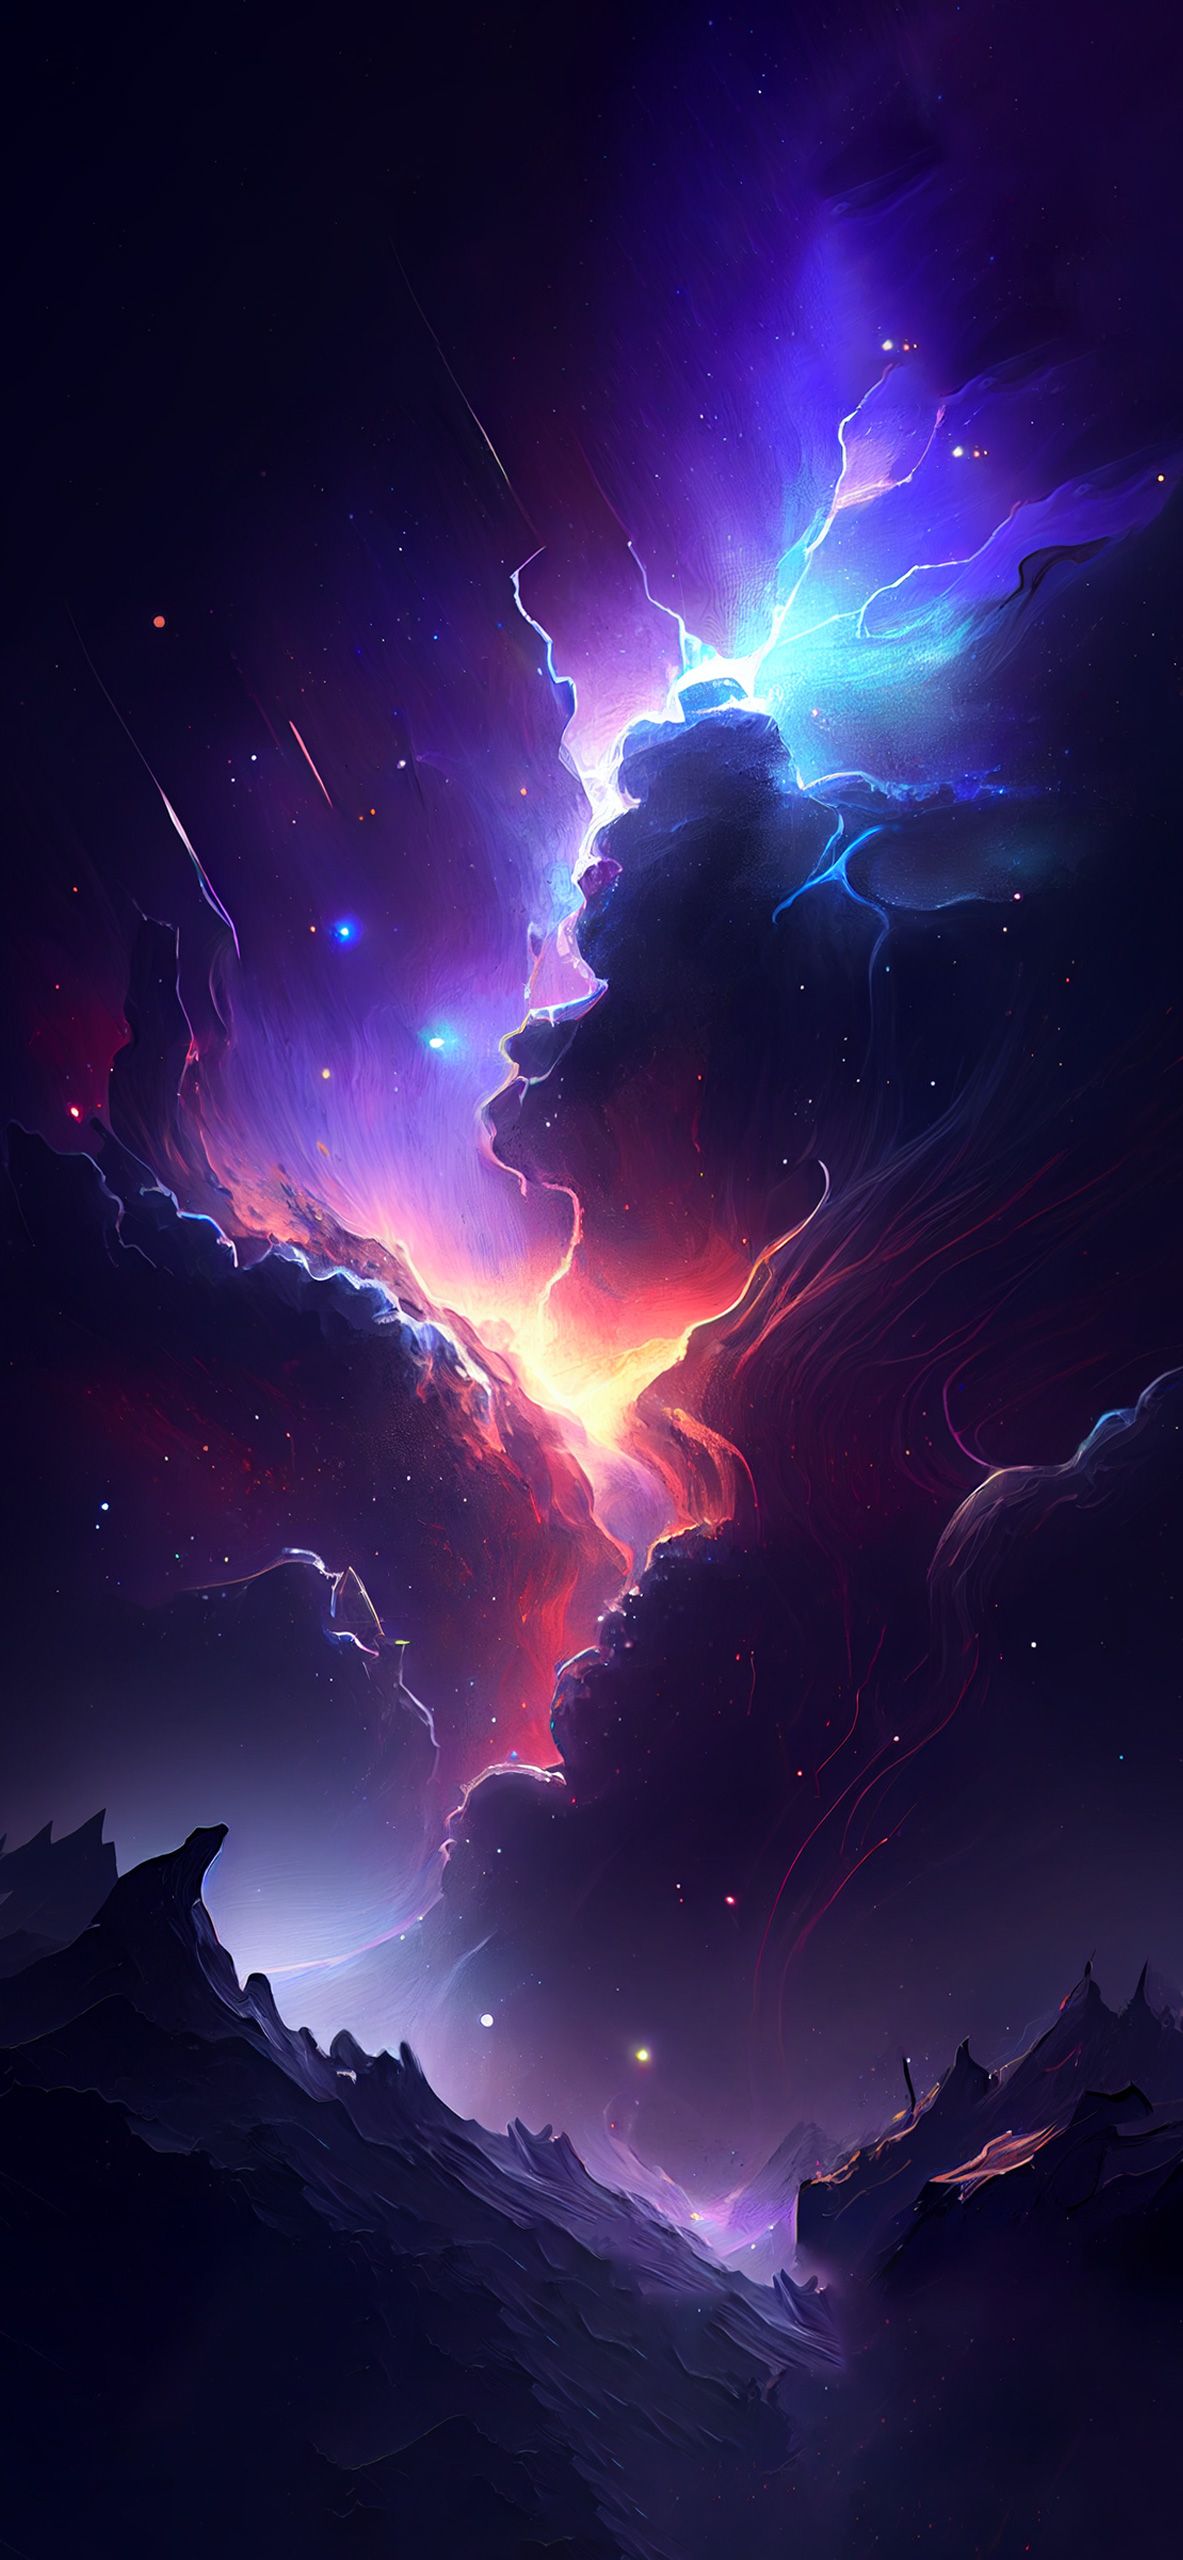 Aesthetic Space Wallpapers 4k Hd Aesthetic Space Backgrounds On Wallpaperbat 3116